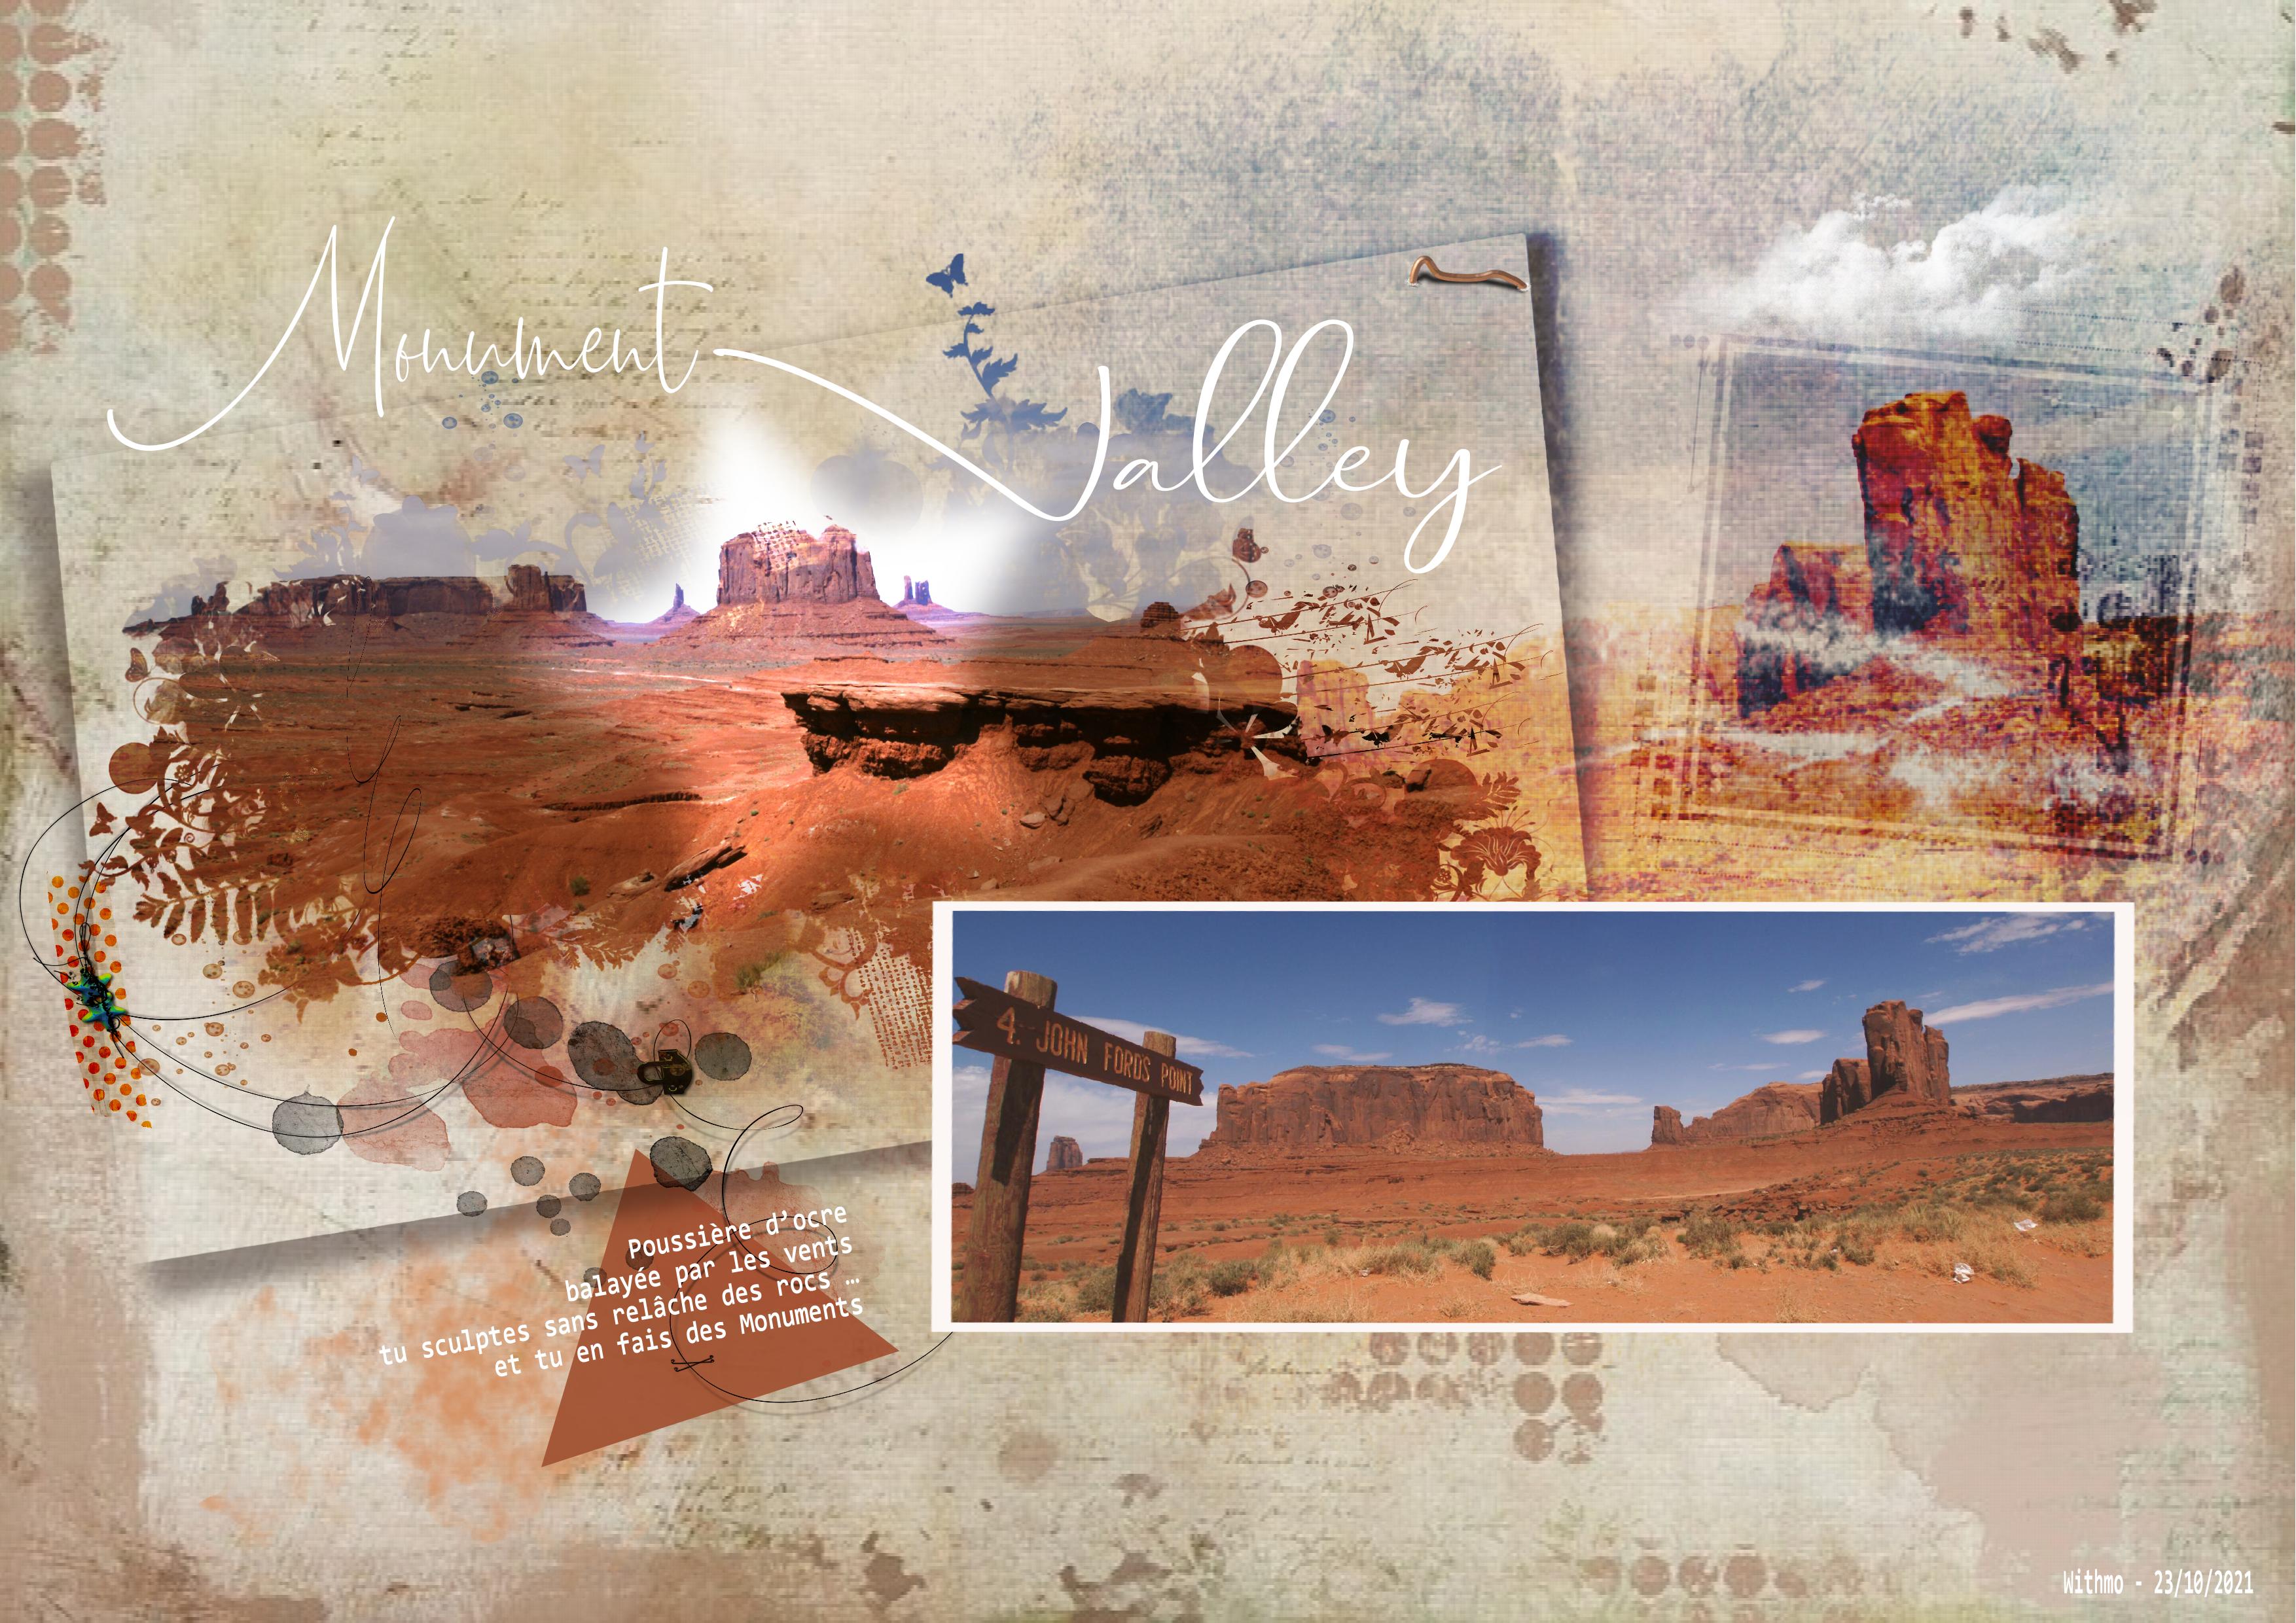 <span  class="uc_style_uc_tiles_grid_image_elementor_uc_items_attribute_title" style="color:#ffffff;">Monument Valley</span>